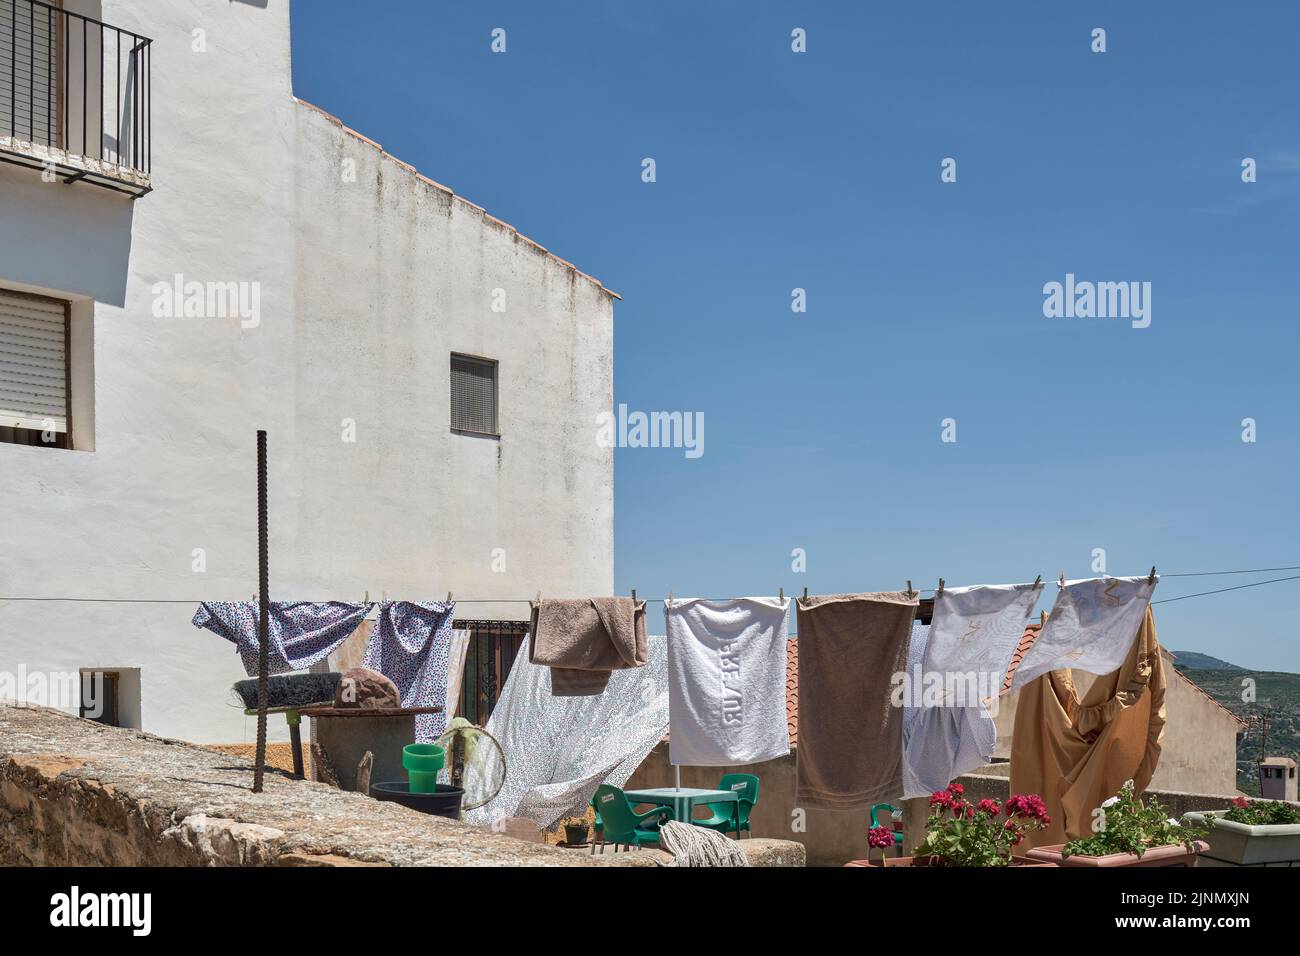 patio of a house with clothes hanging on a rope drying in the sun in the town of Culla, declared the most beautiful in Spain, Castellon, Spain, Europe Stock Photo